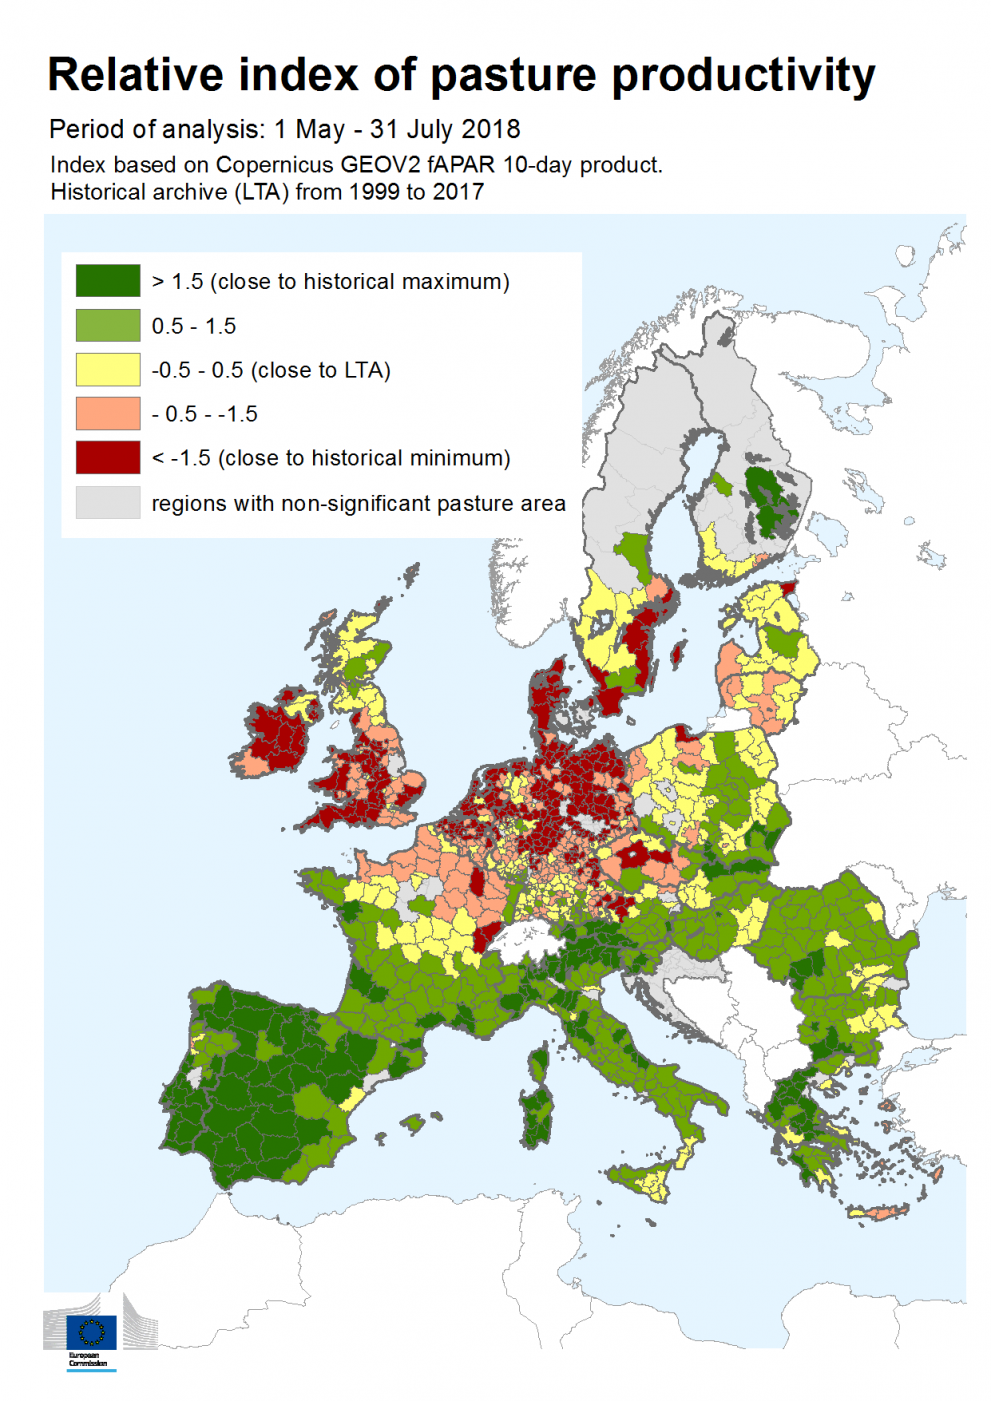 Pasture productivity in the EU-28 from 1 May until 31 July 2018